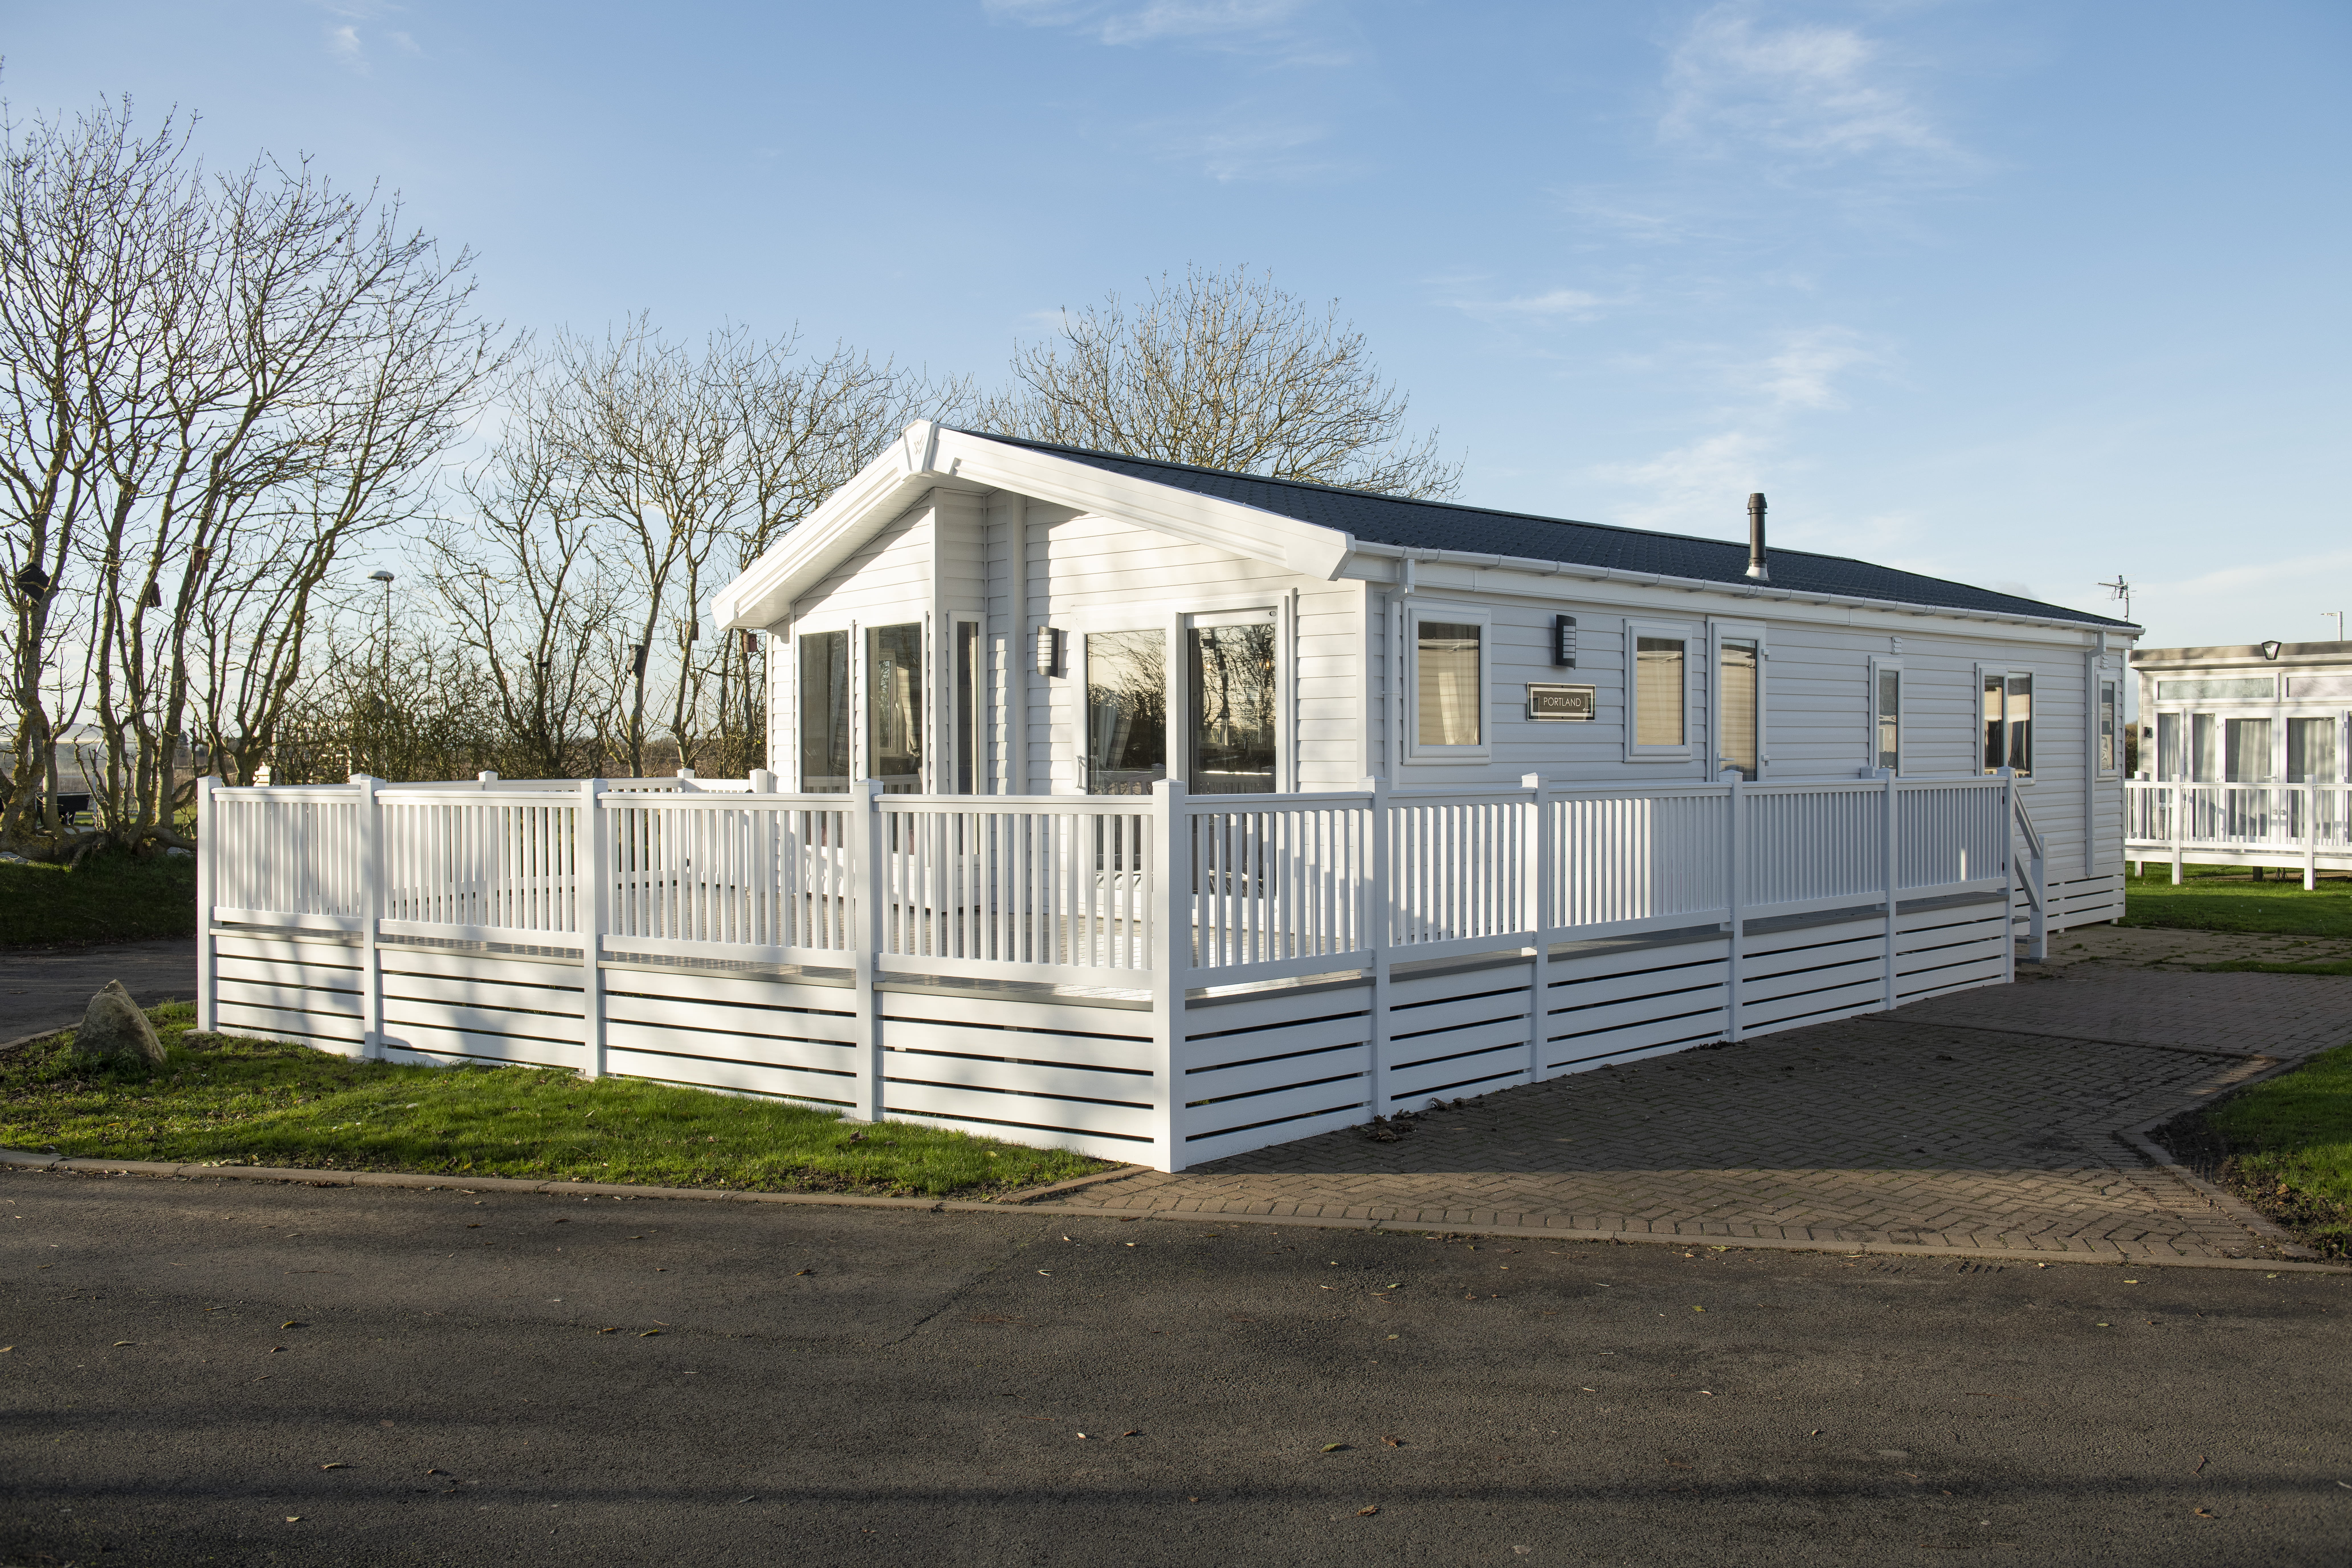 External shot of the Willerby lodge at Parkdean Resorts